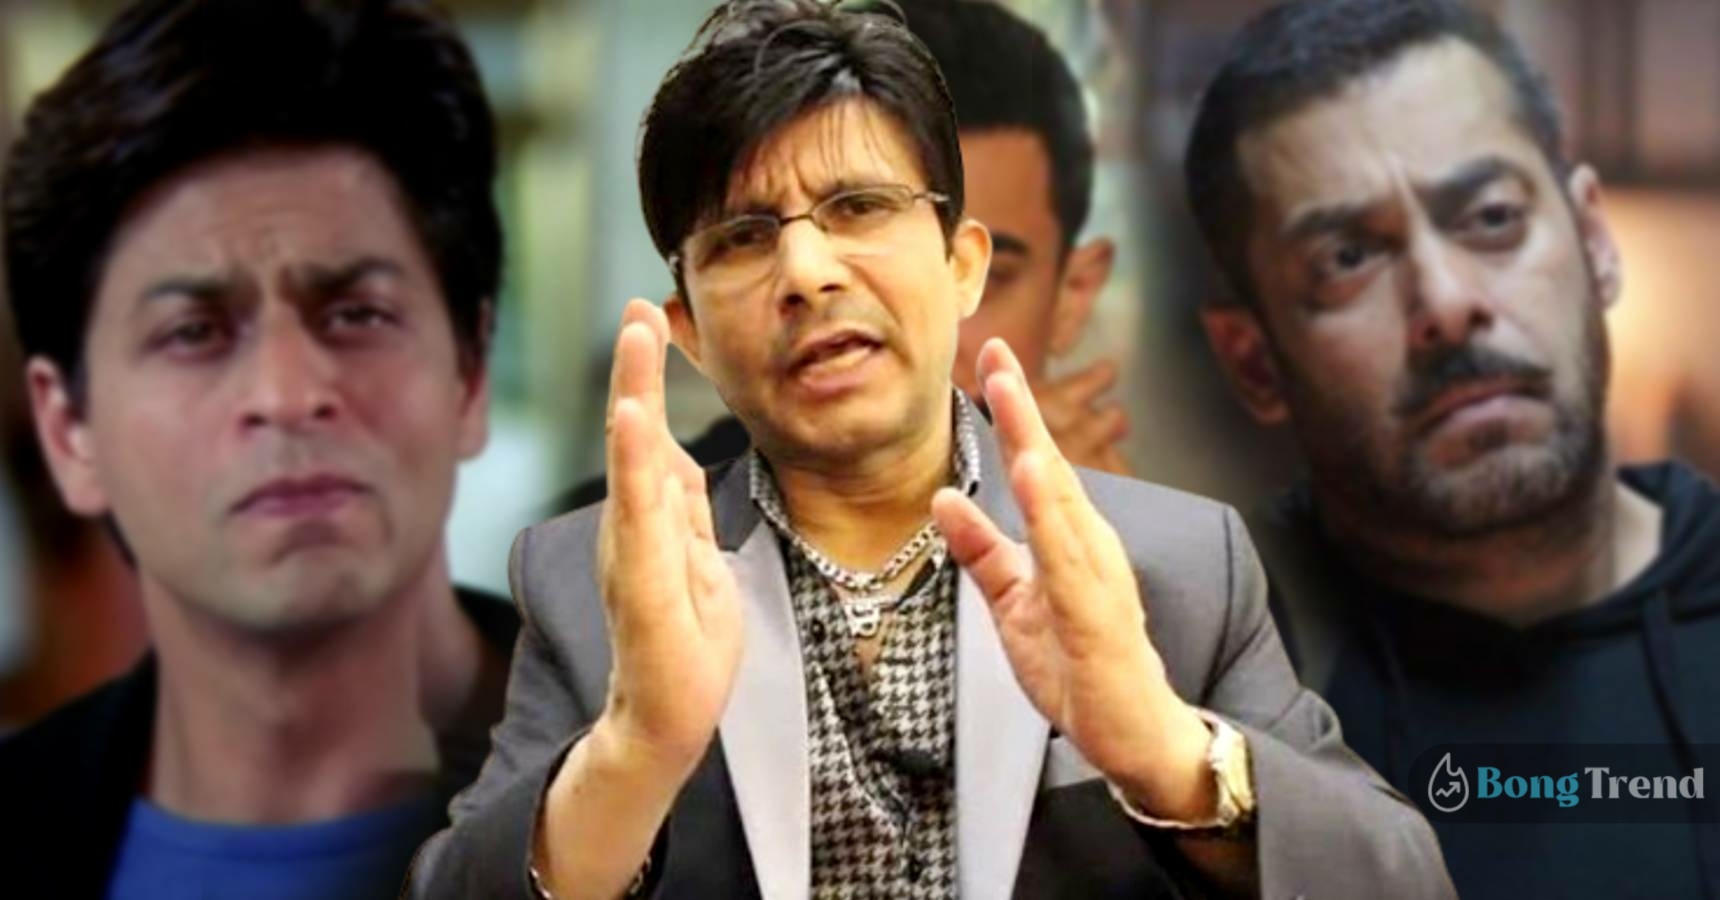 KRK claims Shah Rukh, Salman and Aamir’s movies are flop because they are old and ghamandi